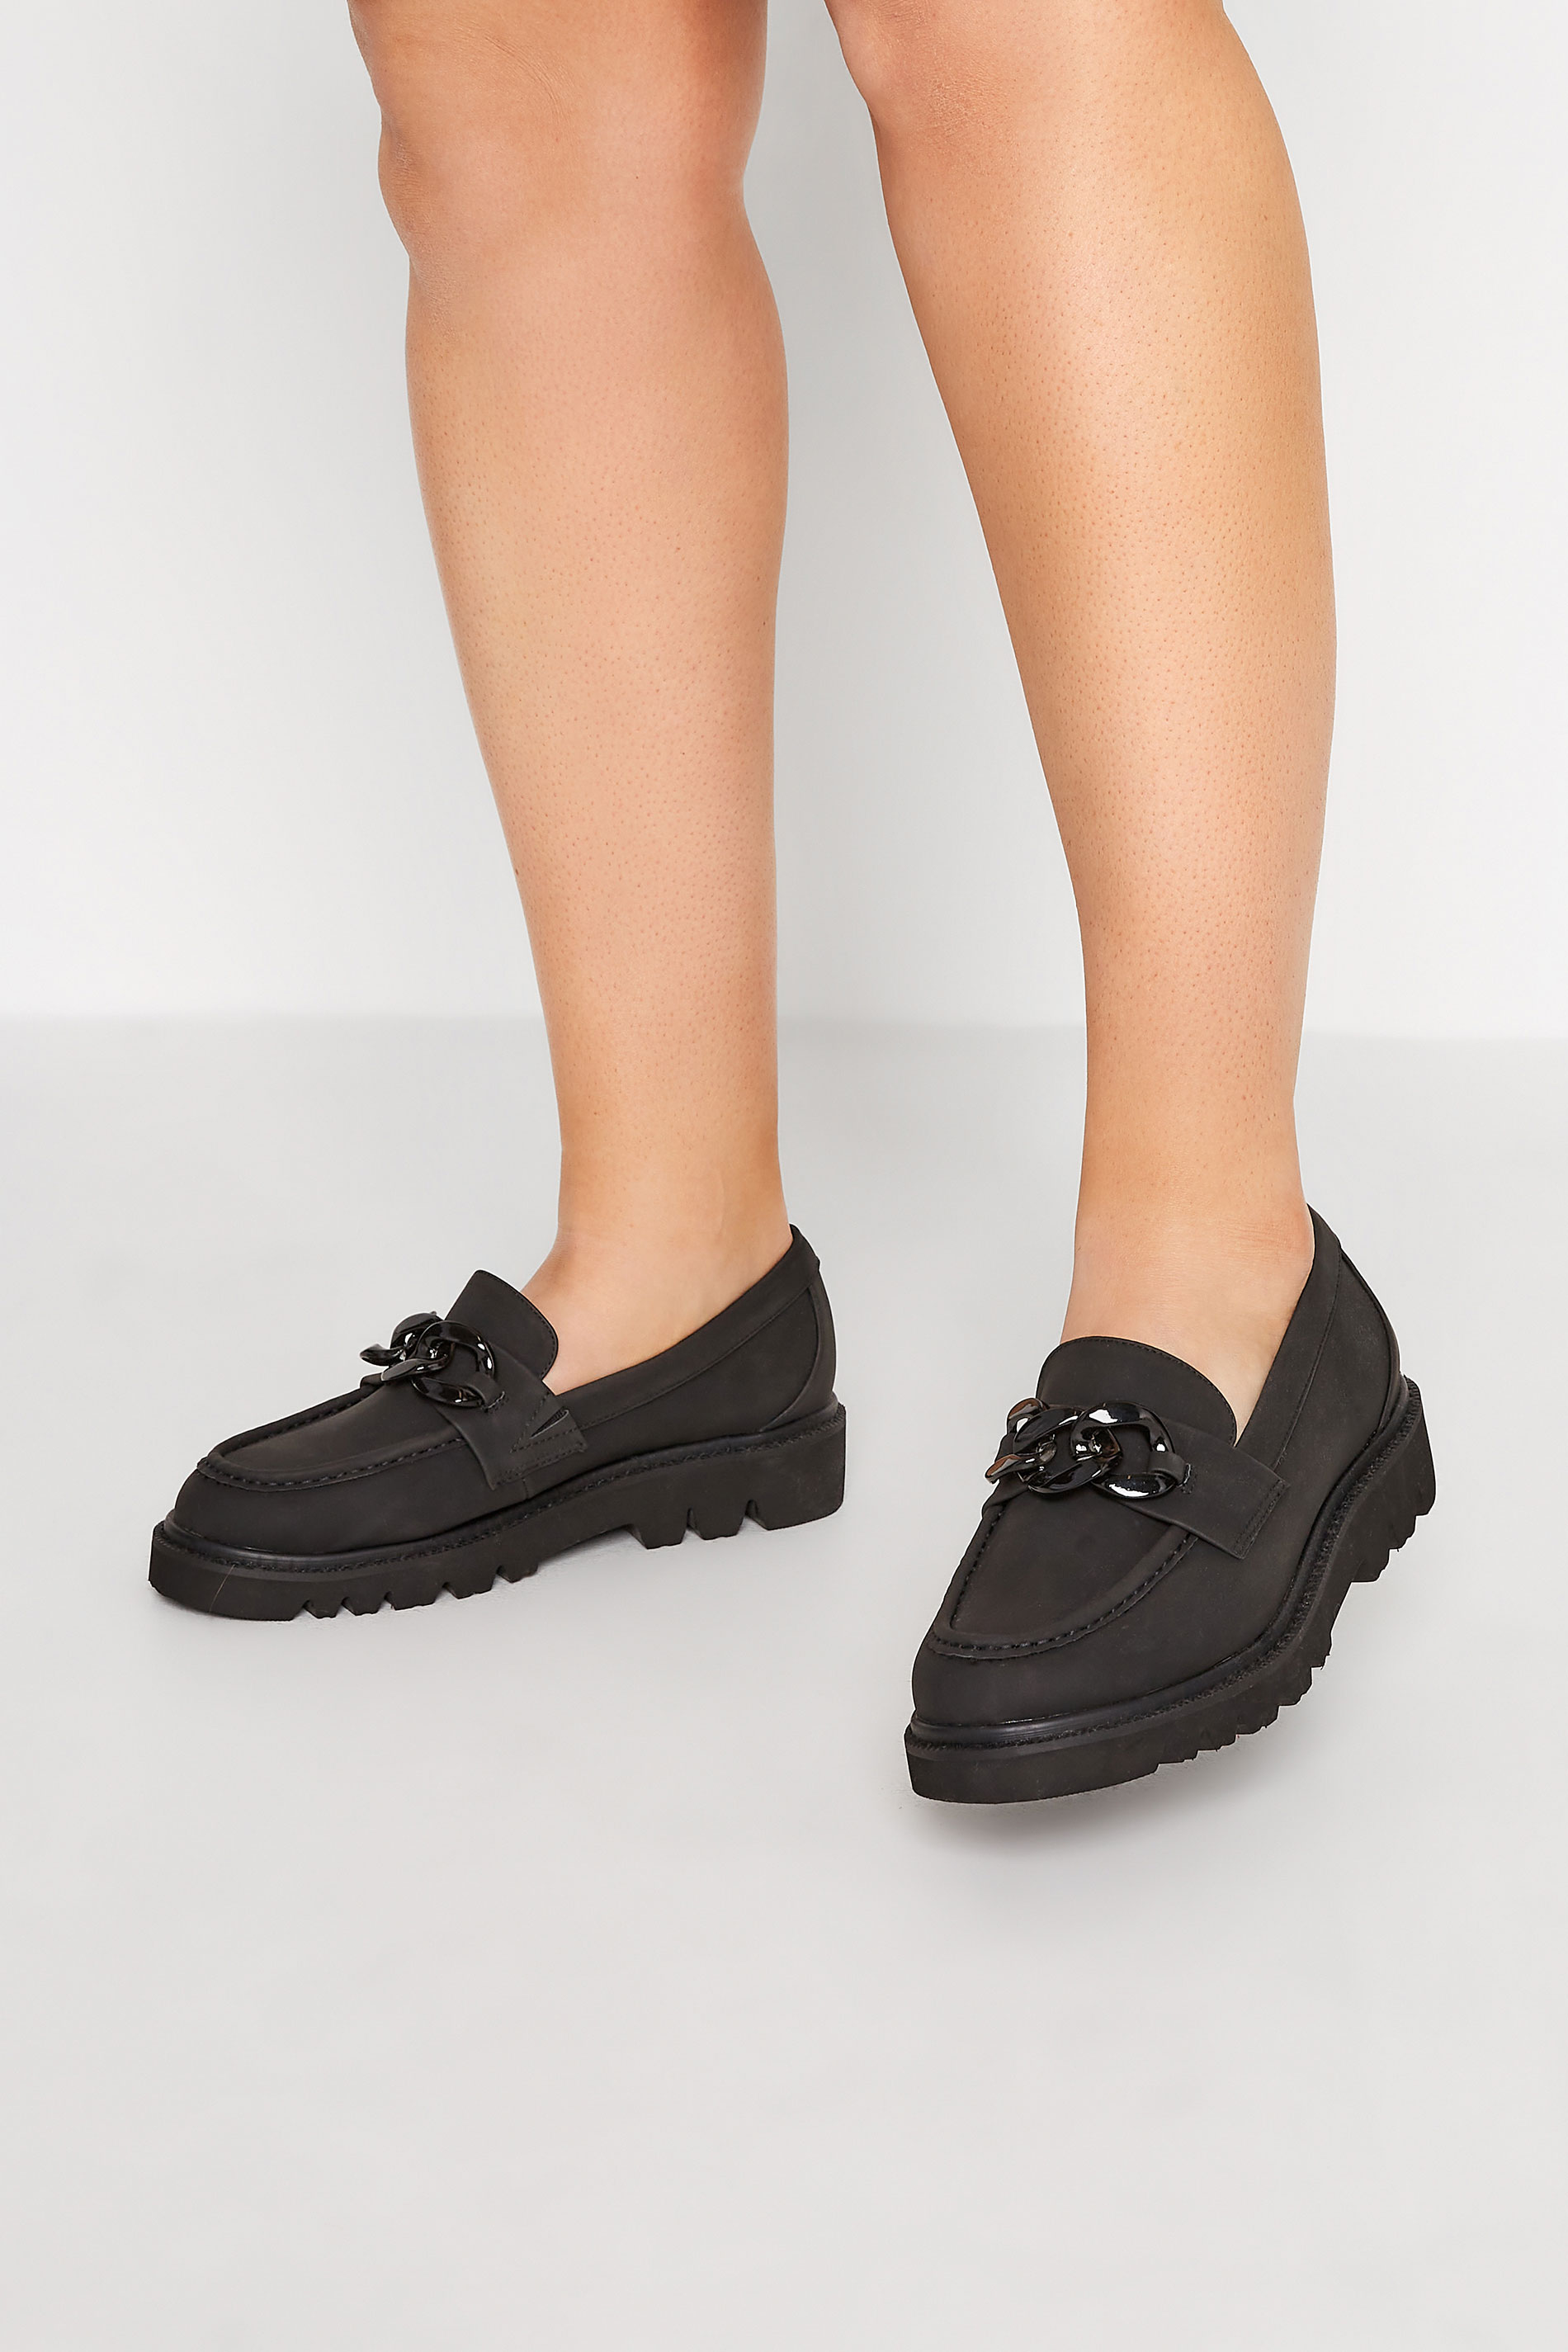 LIMITED COLLECTION Black Chunky Chain Loafers In Extra Wide EEE Fit 1